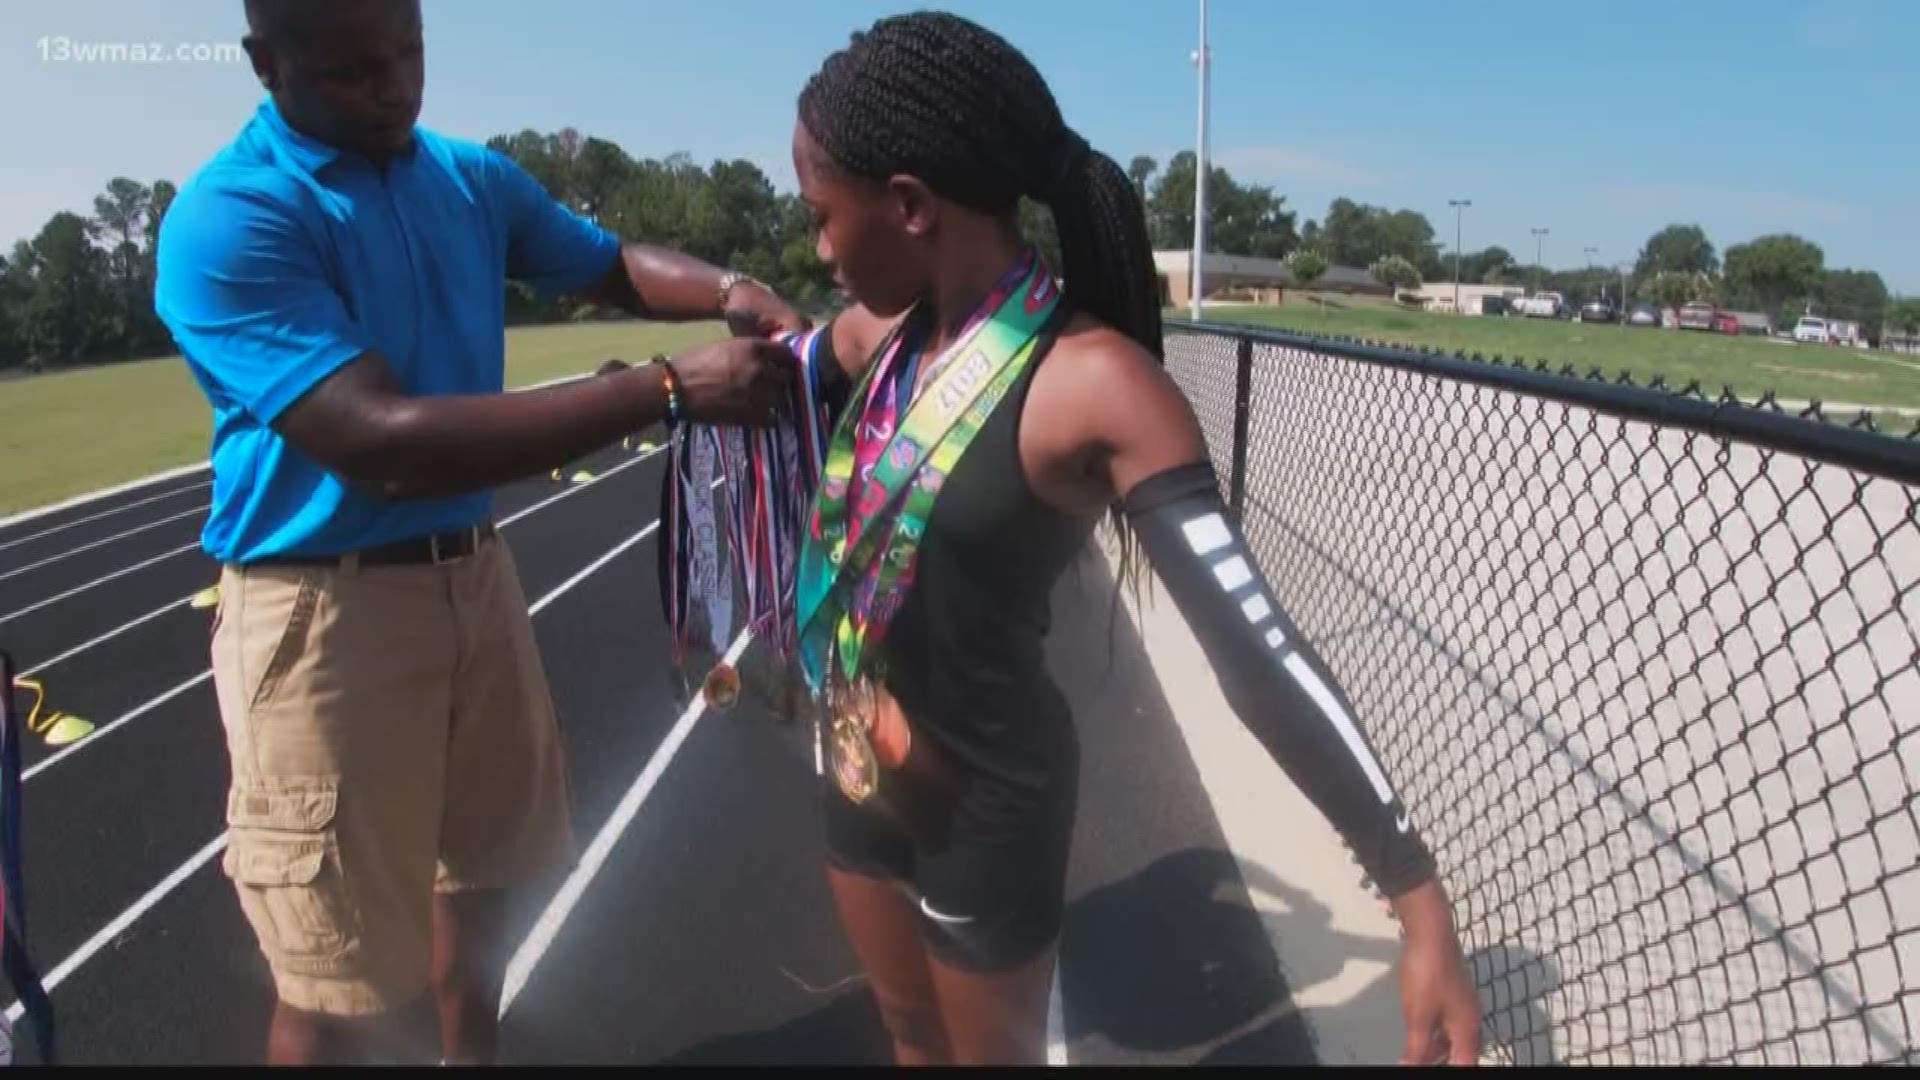 At just 10-years-old Adrianna Haynes already has 46 track medals and is ranked in the top five in the nation for her age group. She just competed in the Junior Olympics in North Carolina.